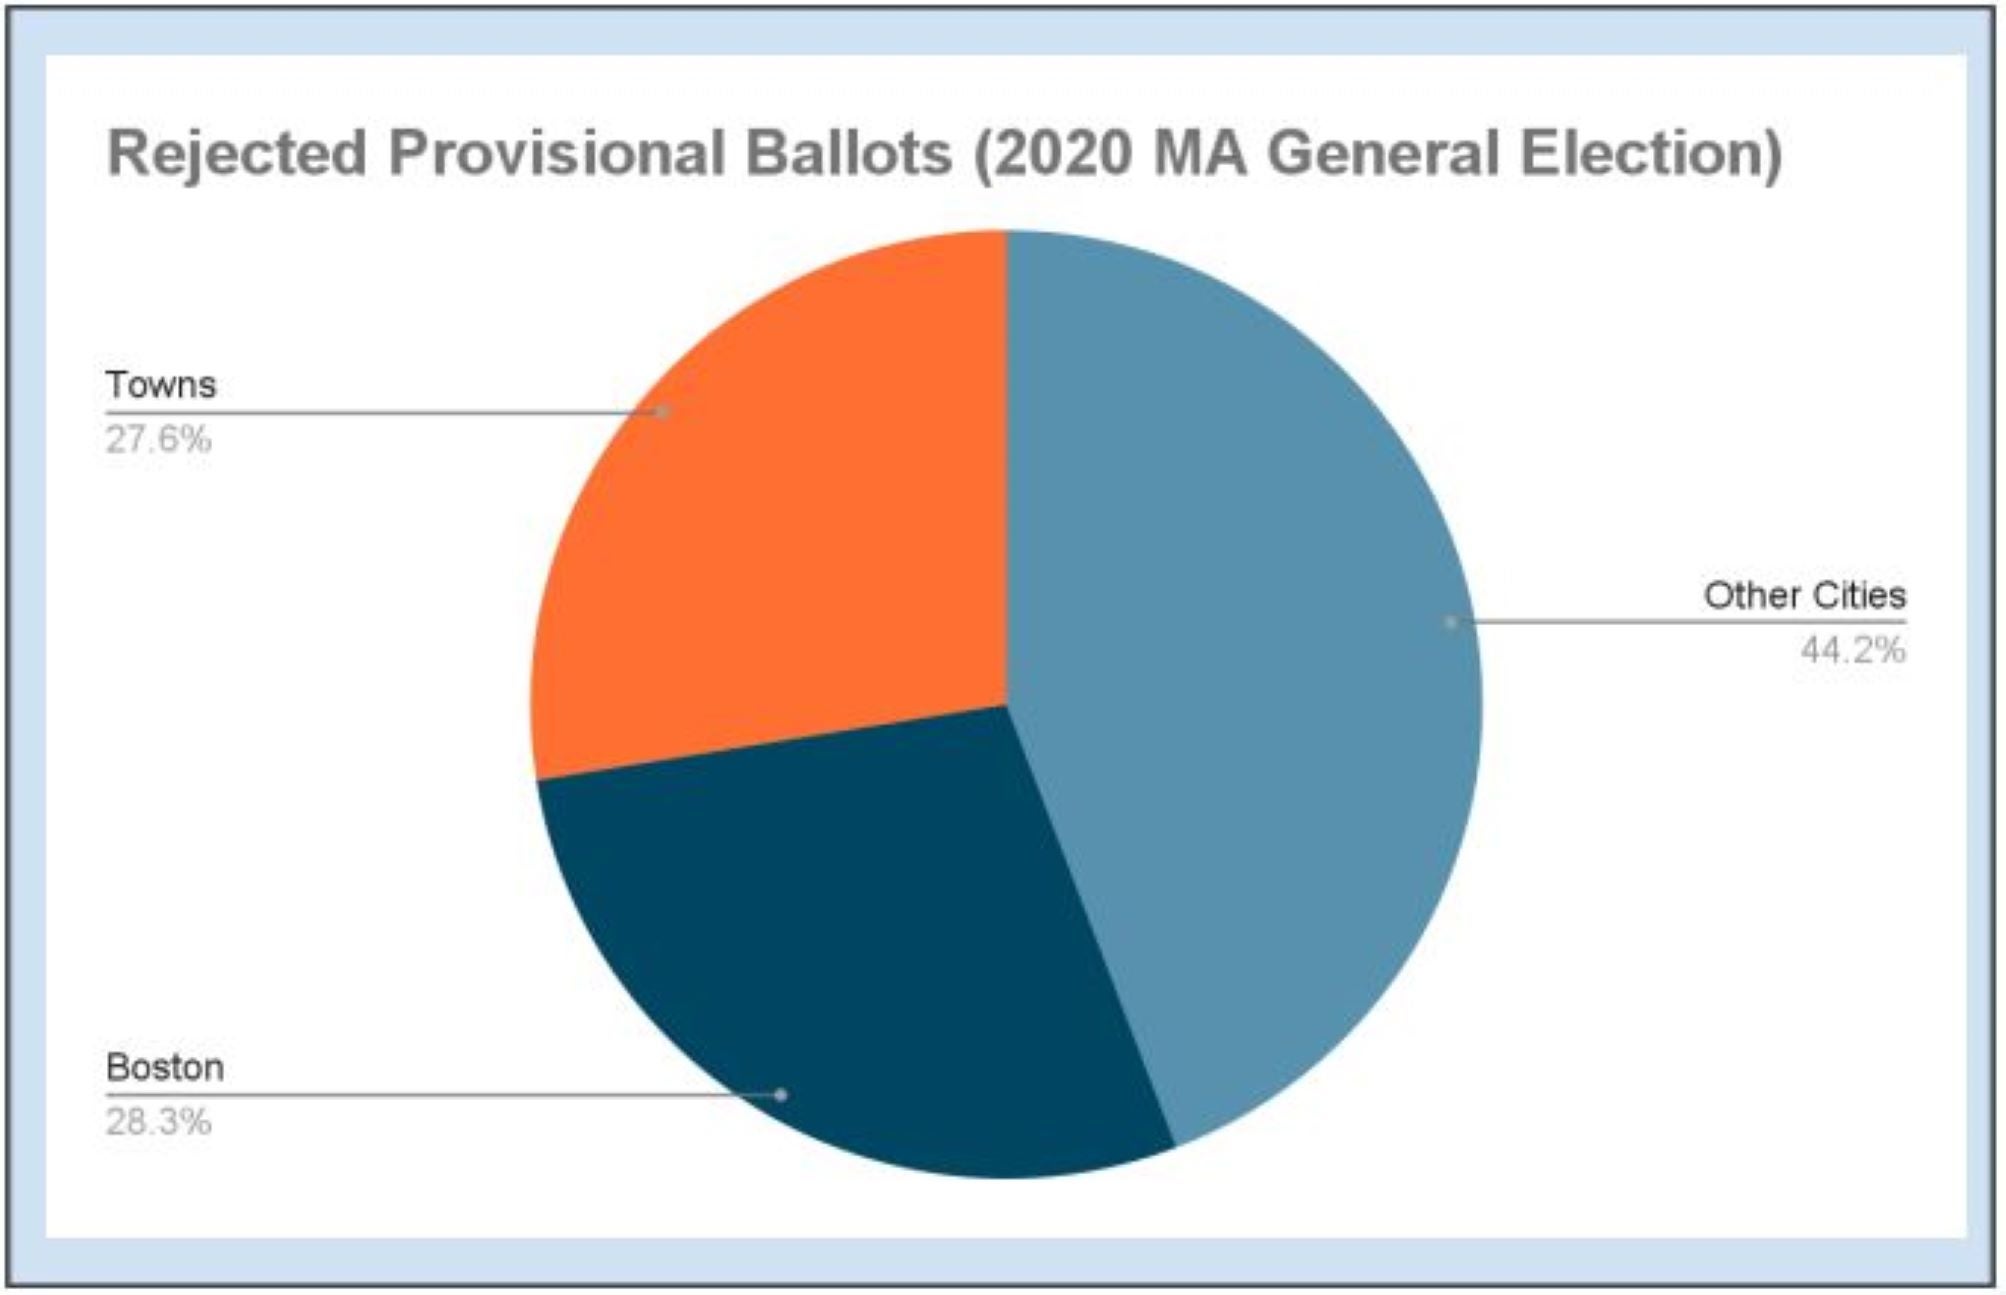 Almost 60% of Mass. provisional ballots were rejected in 2020 election